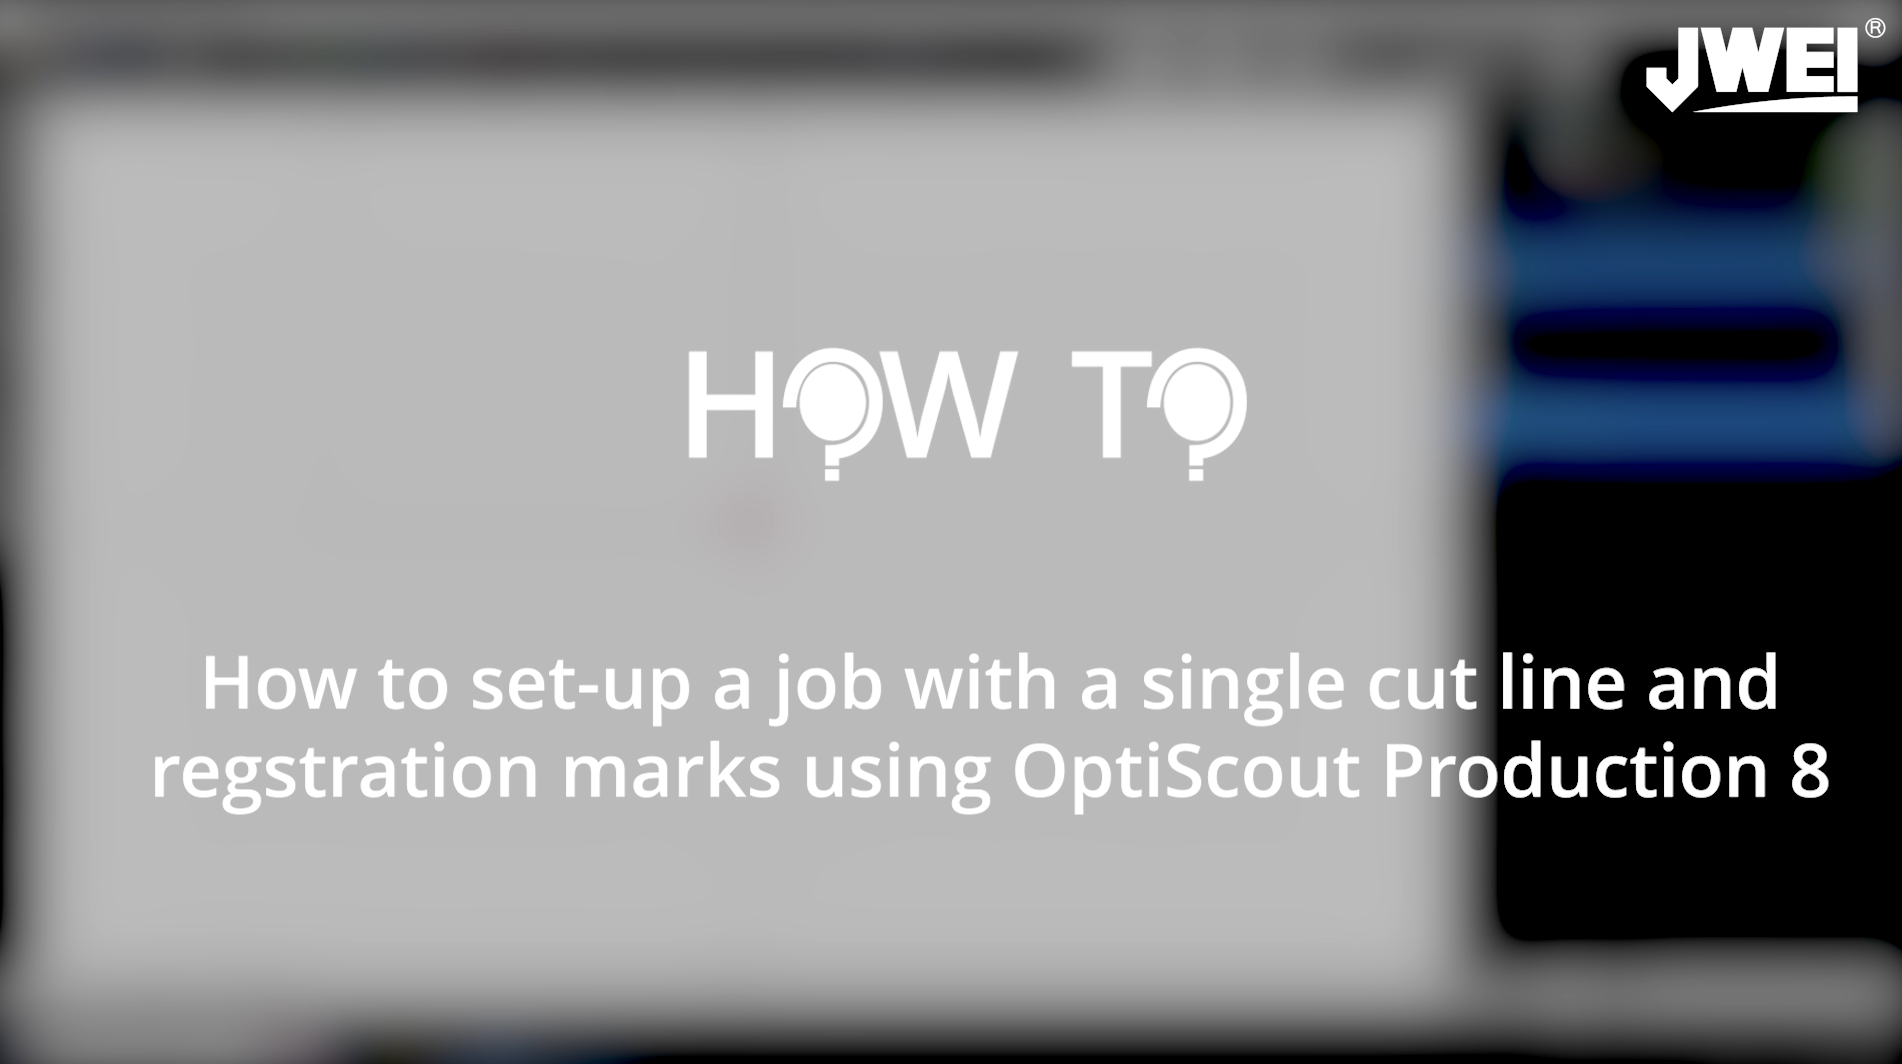 How to set up a job with a single cut line and registration marks using OptiScout Production 8